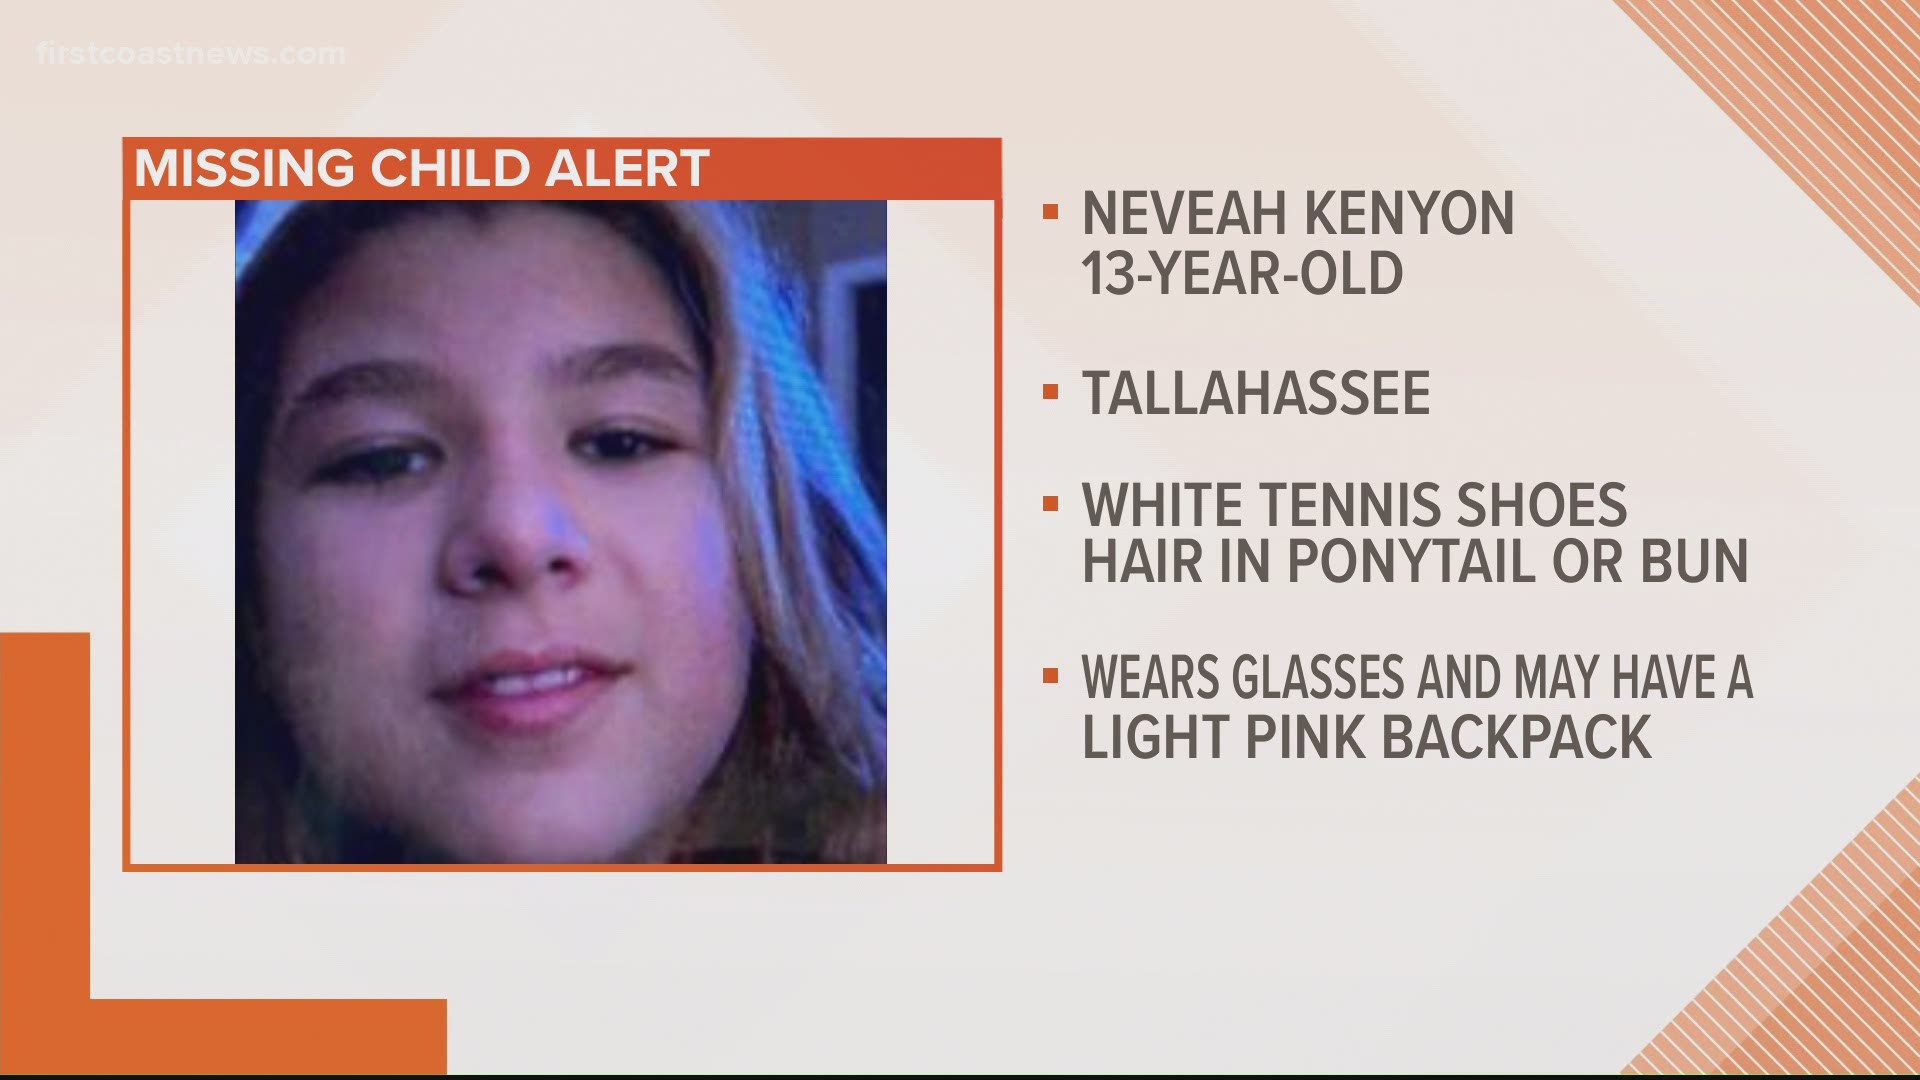 Law enforcement says she was last seen wearing white tennis shoes, and may have her air up in a pony tail or bun.